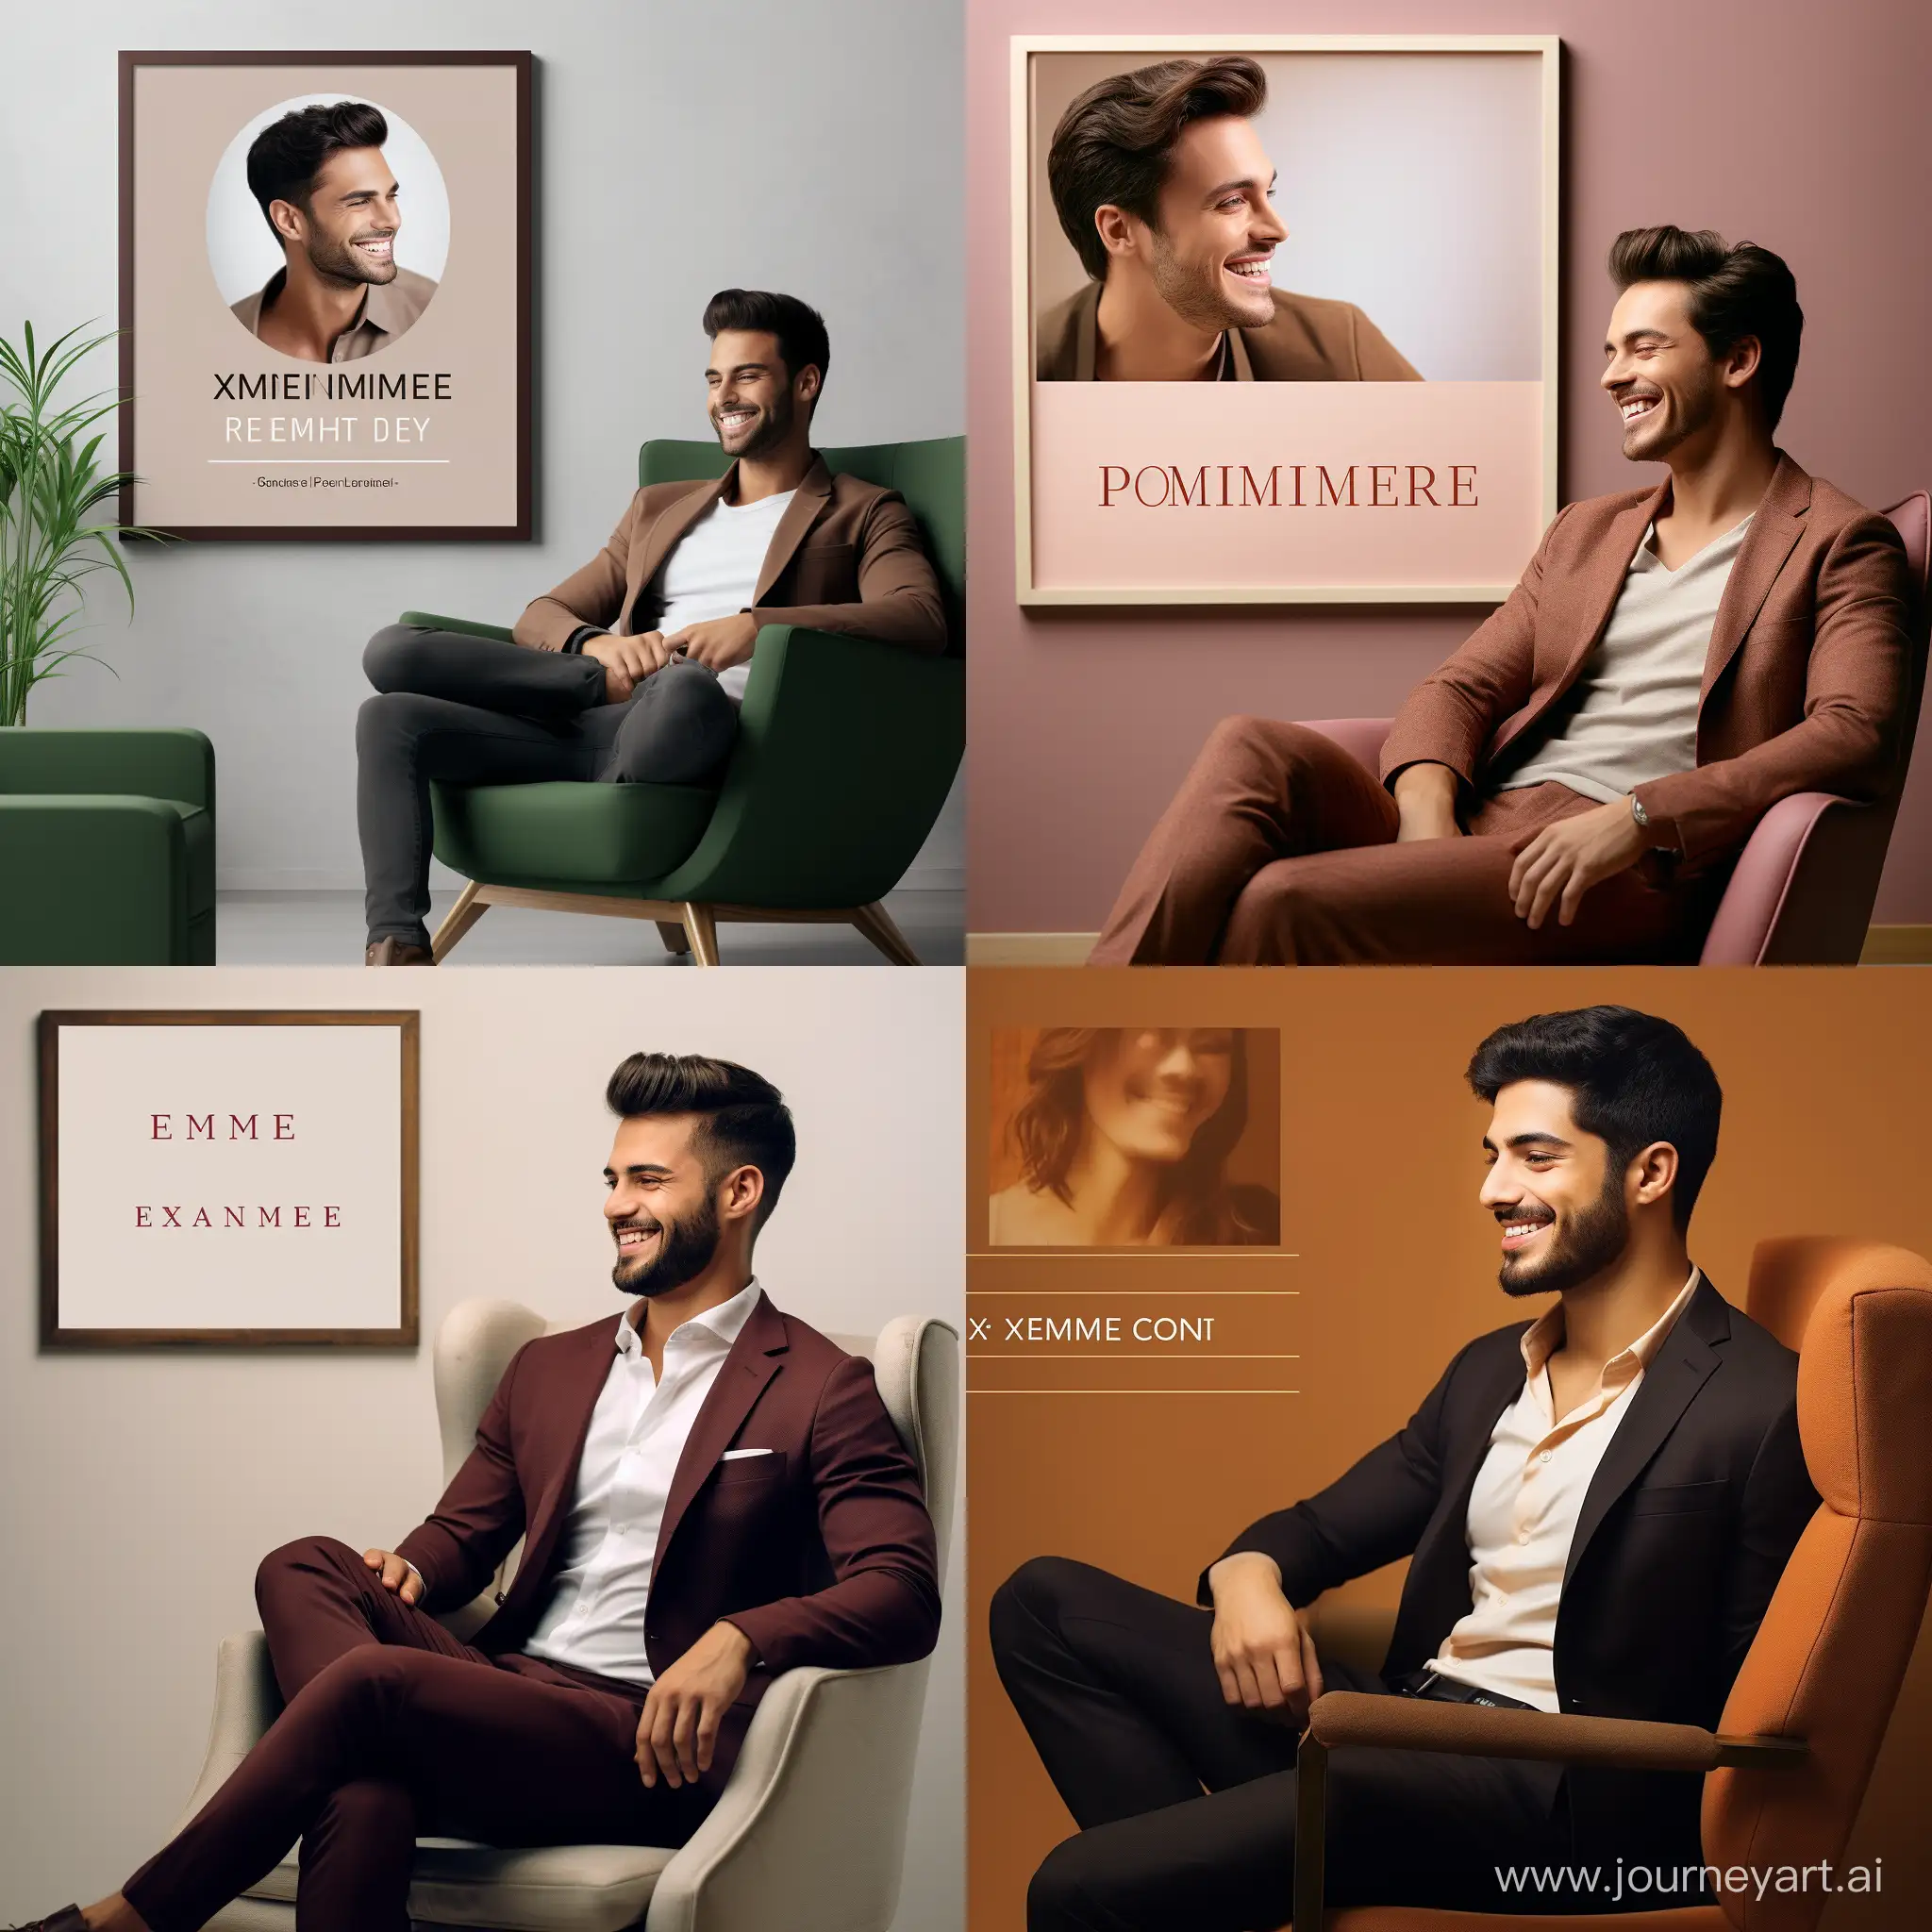 A handsome man with a confident smile sits relaxed on a modern armchair. He is dressed in a stylish outfit that complements his physique and personality. Behind him, a mockup of his X profile page takes up the wall. The profile picture showcases a close-up of his face, capturing his captivating eyes and charming smile. His profile name, Ahmed Gineedi, is displayed prominently in a stylish font that matches the overall aesthetic of the page. The rest of the profile page is filled with details that hint at Ahmed's interests and personality, such as photos from his travels, quotes that inspire him, or links to his creative work.

I hope this detailed description gives you a good idea of what the photo you requested might look like. Perhaps you can use it to create your own artwork or find a similar image online.